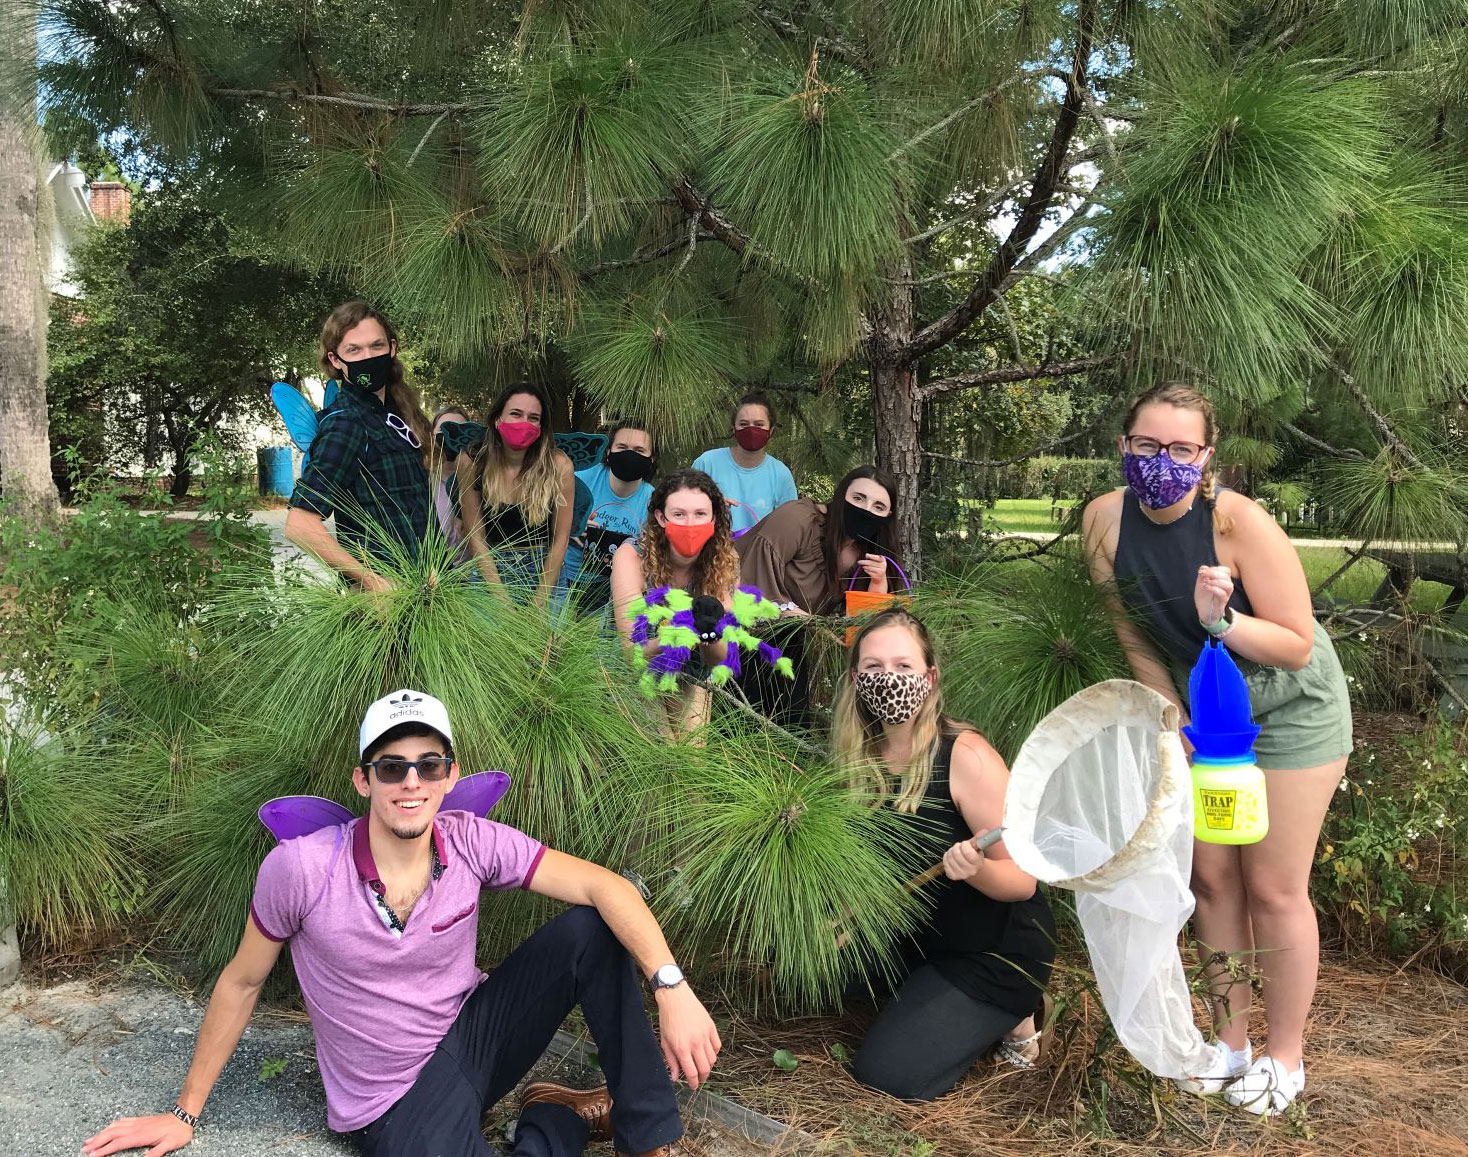 Group photo of students in Halloween costumes in a natural scene